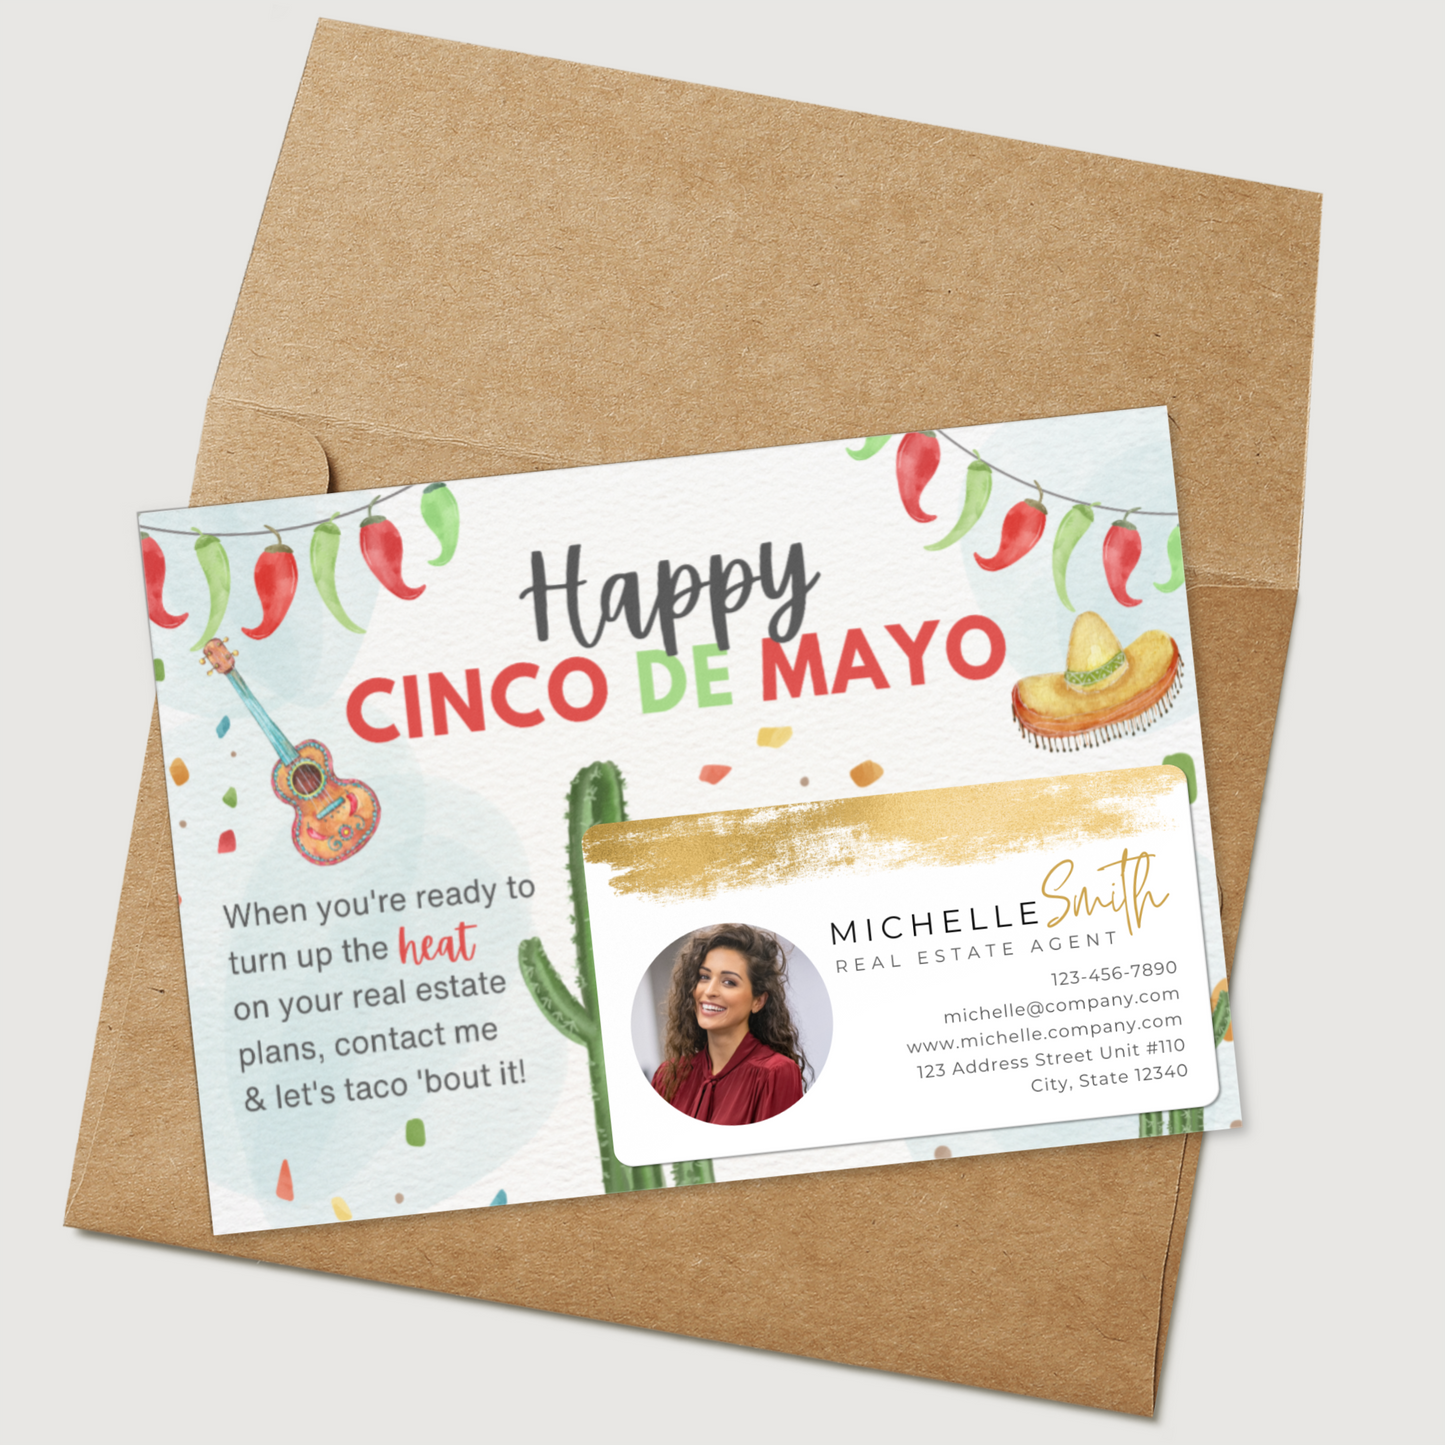 Turn Up The Heat on Your Real Estate Plans - Set of Cinco de Mayo Postcards